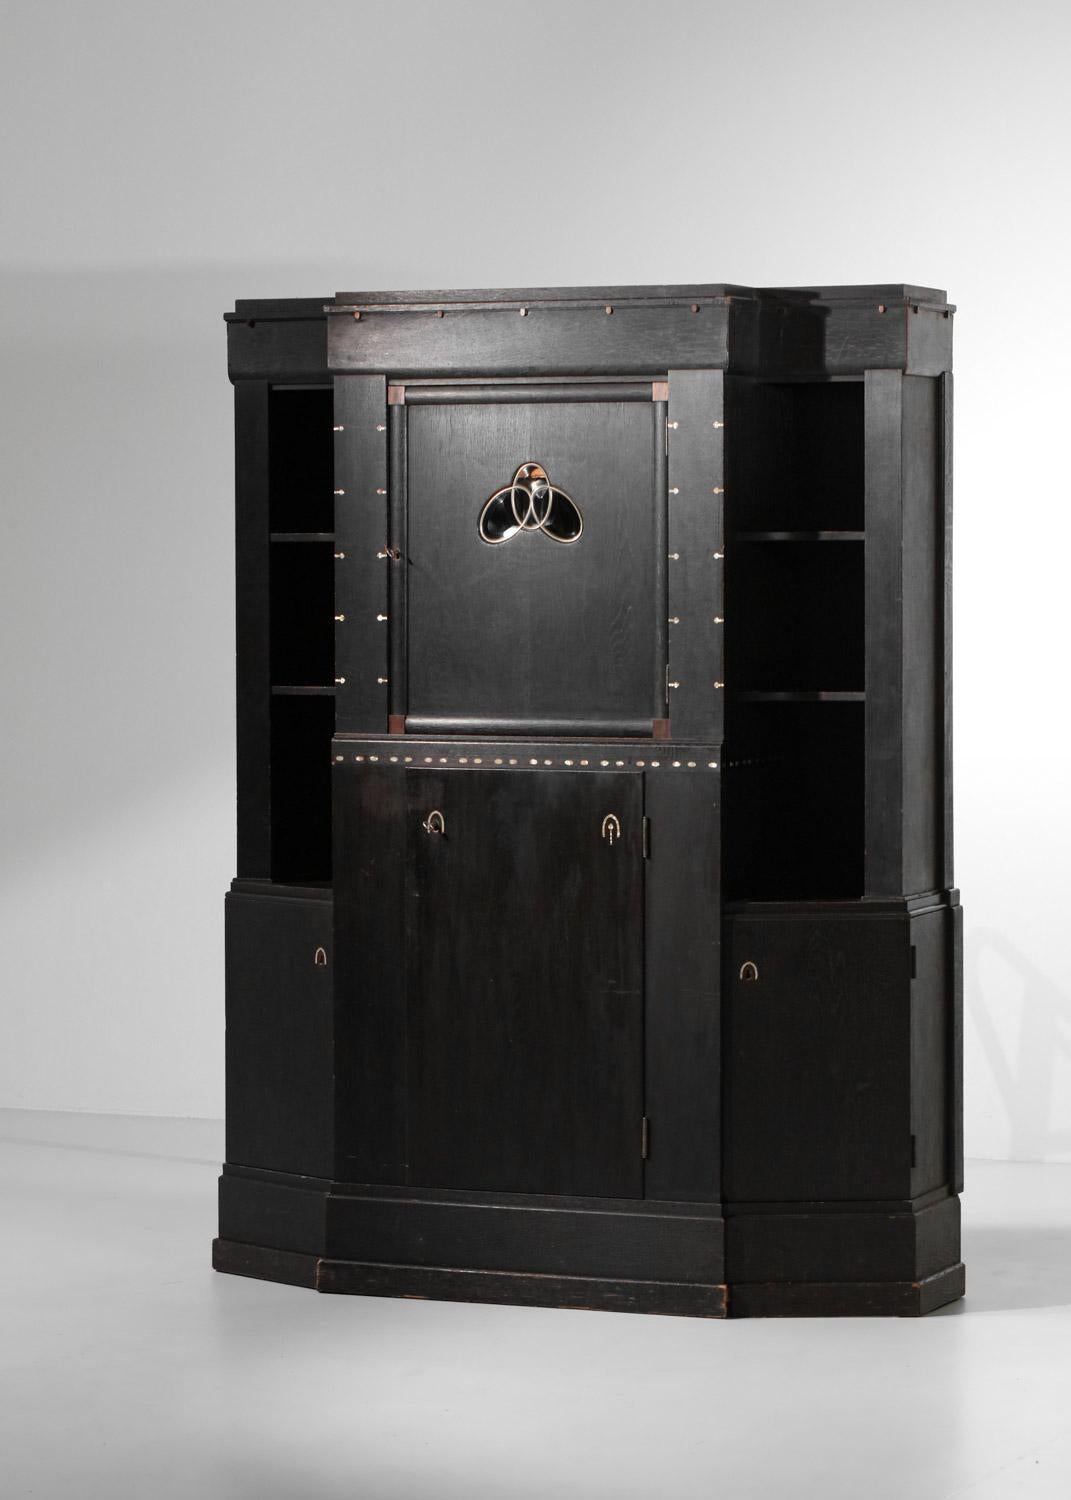 Austrian Art craft furniture from the 20s in blackened oak attributed to Josef hoffmann  For Sale